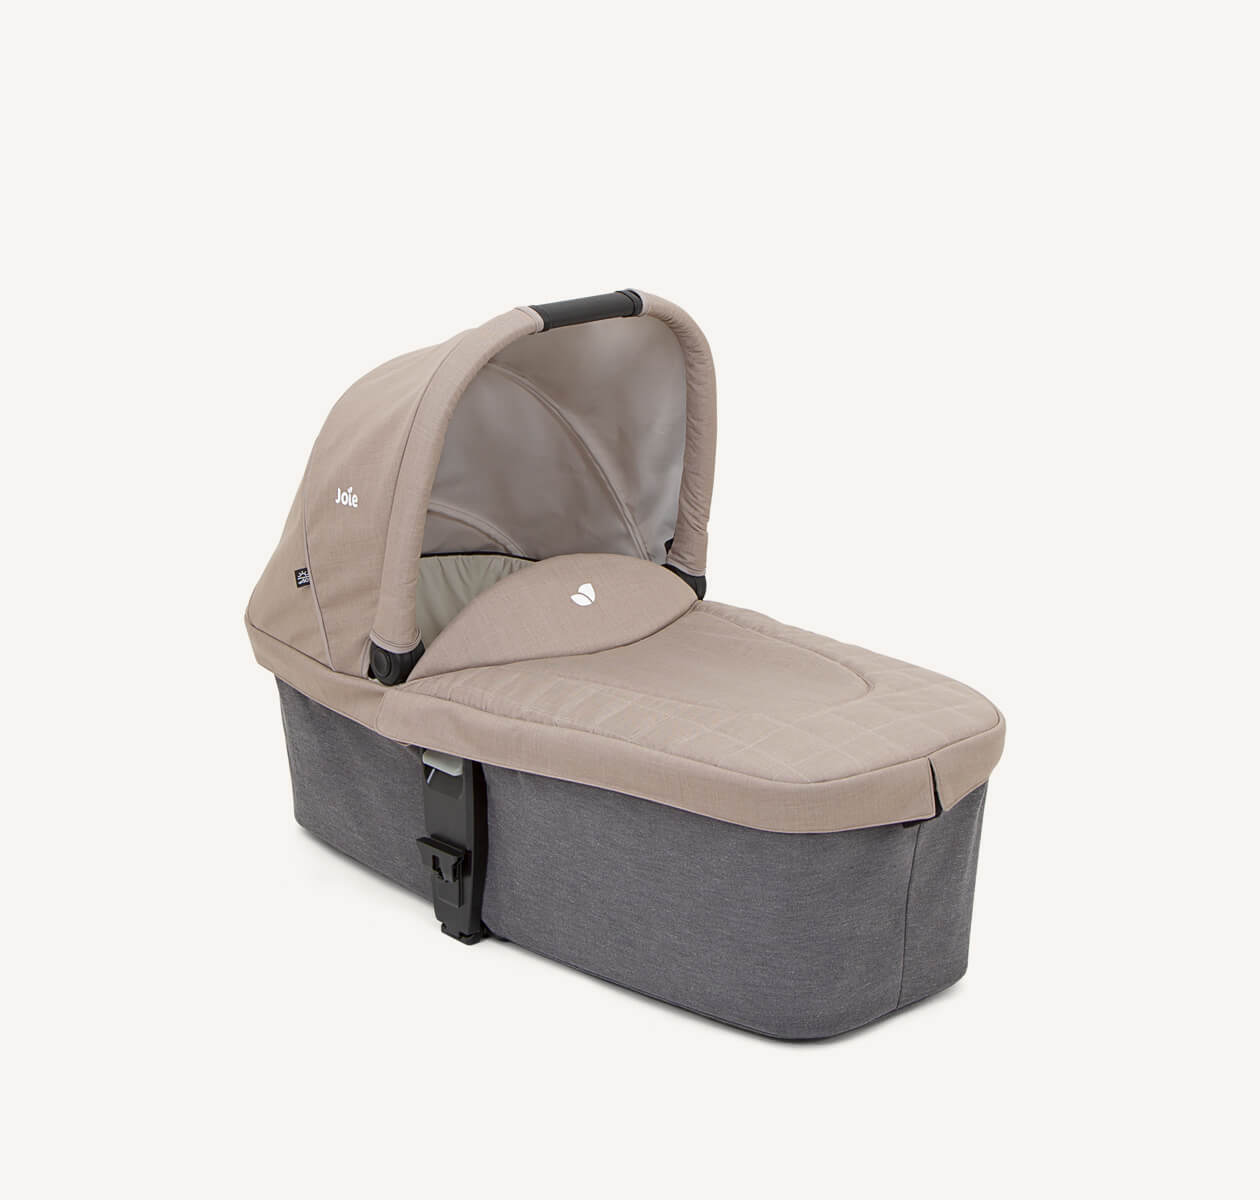  Joie chrome carry cot in light brown and gray at a right angle.